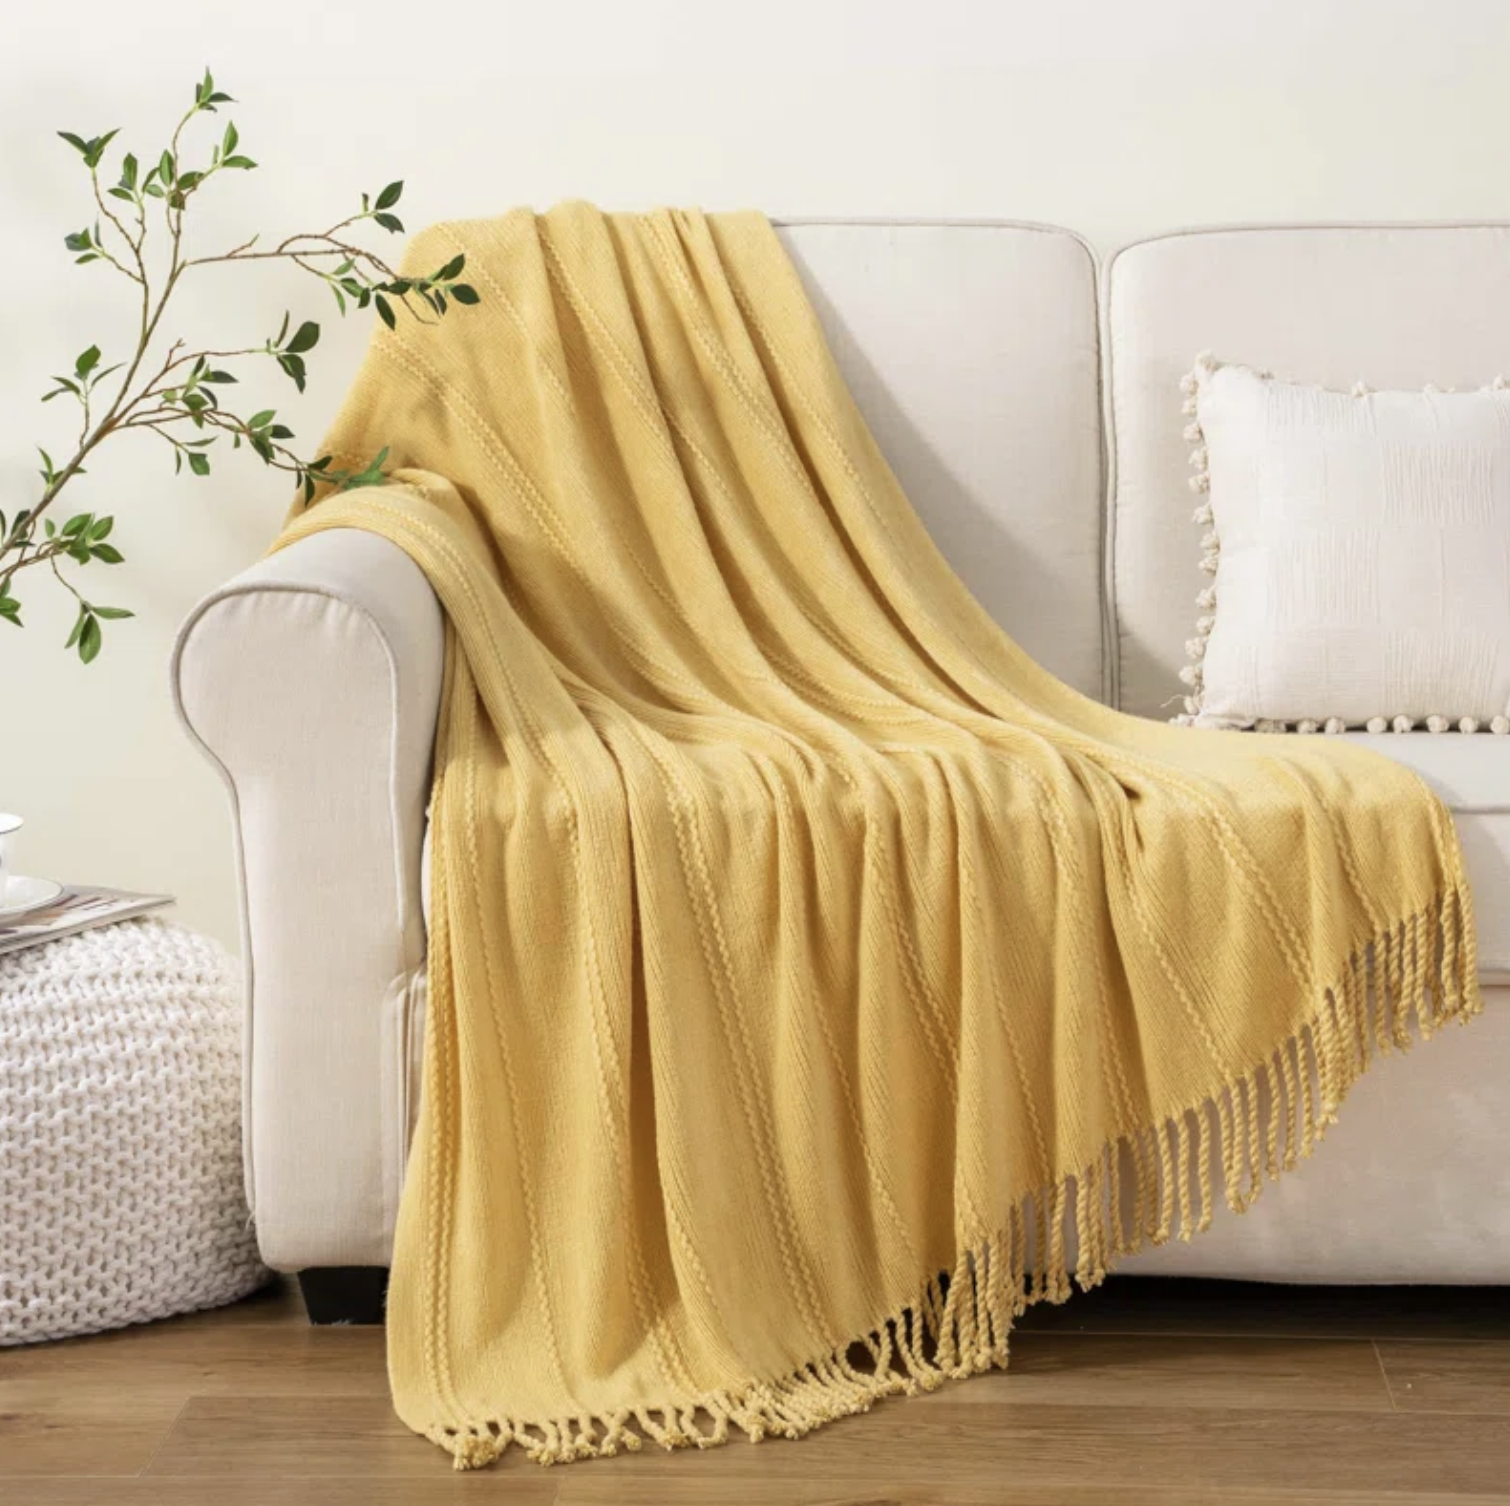 the yellow blanket draped over a couch